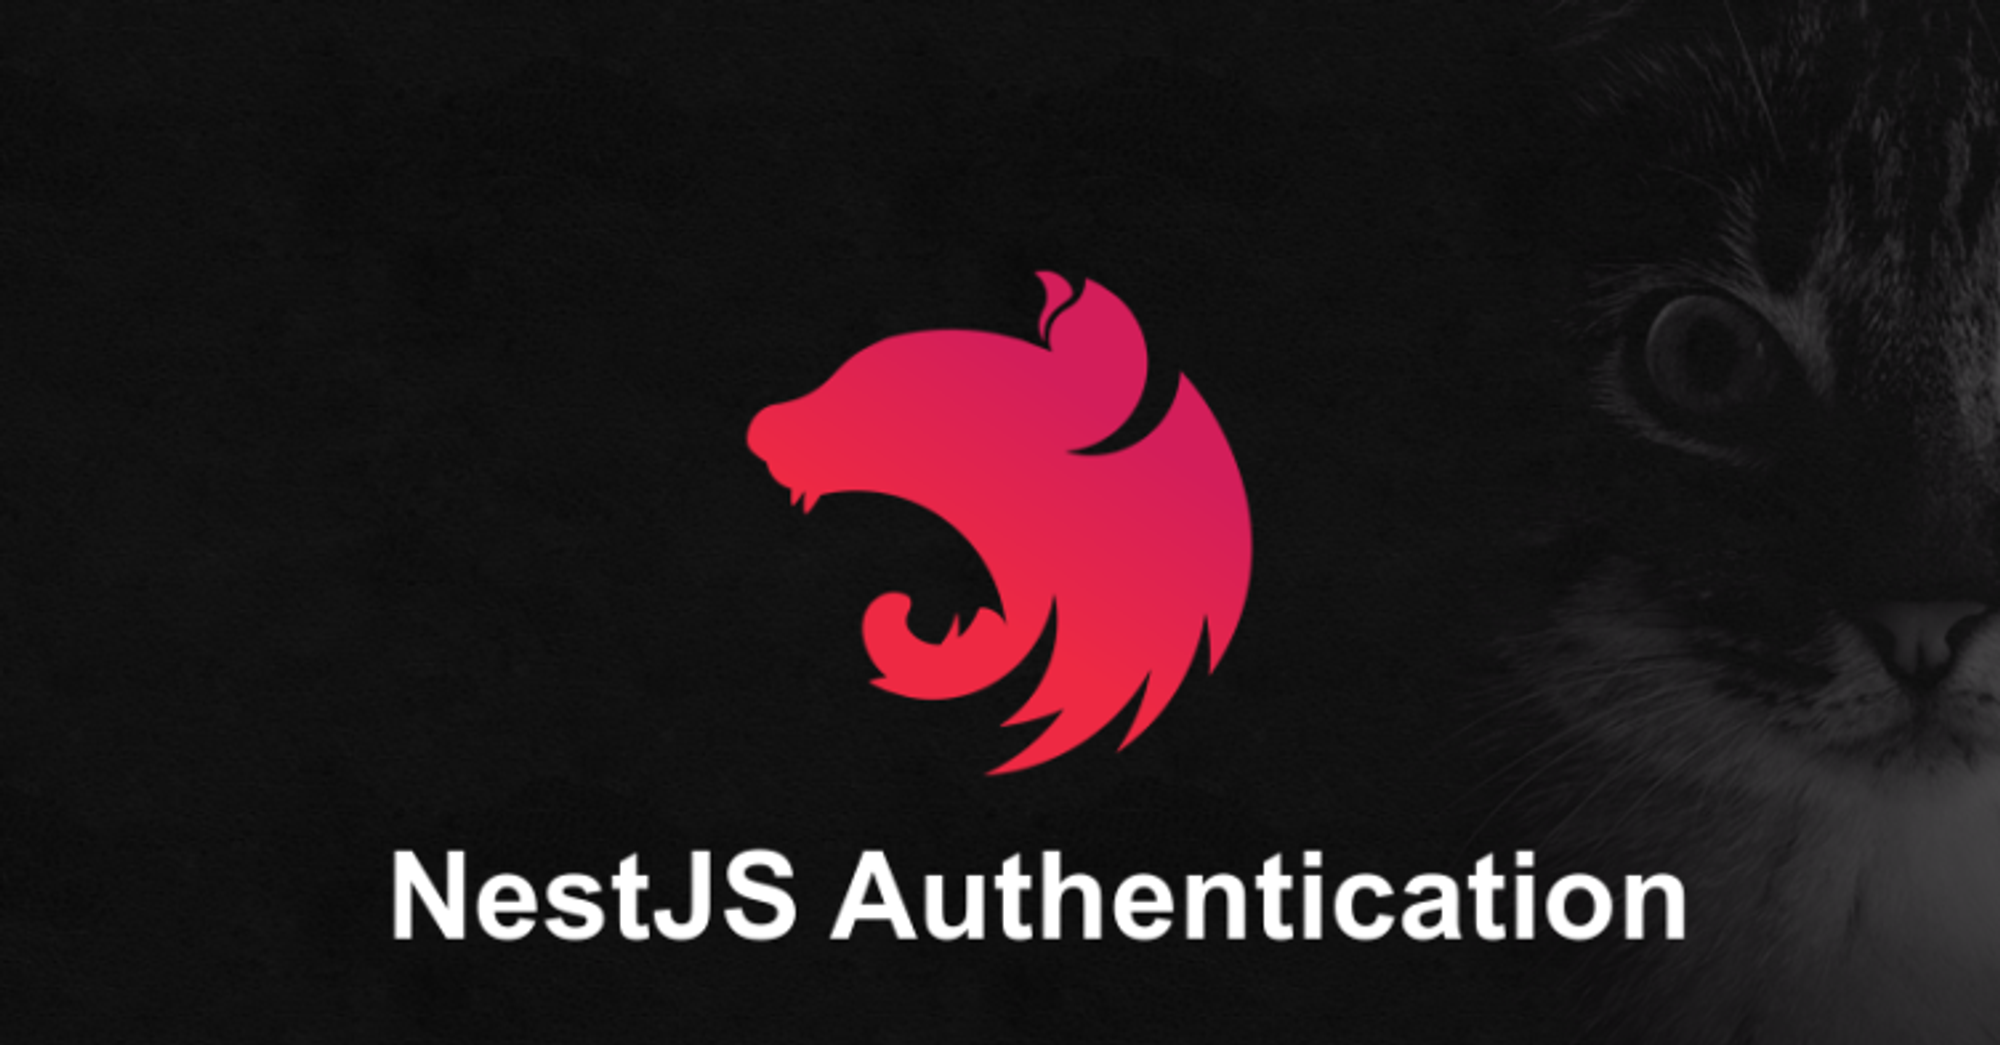 Implementing auth flow as fast as possible using NestJS 